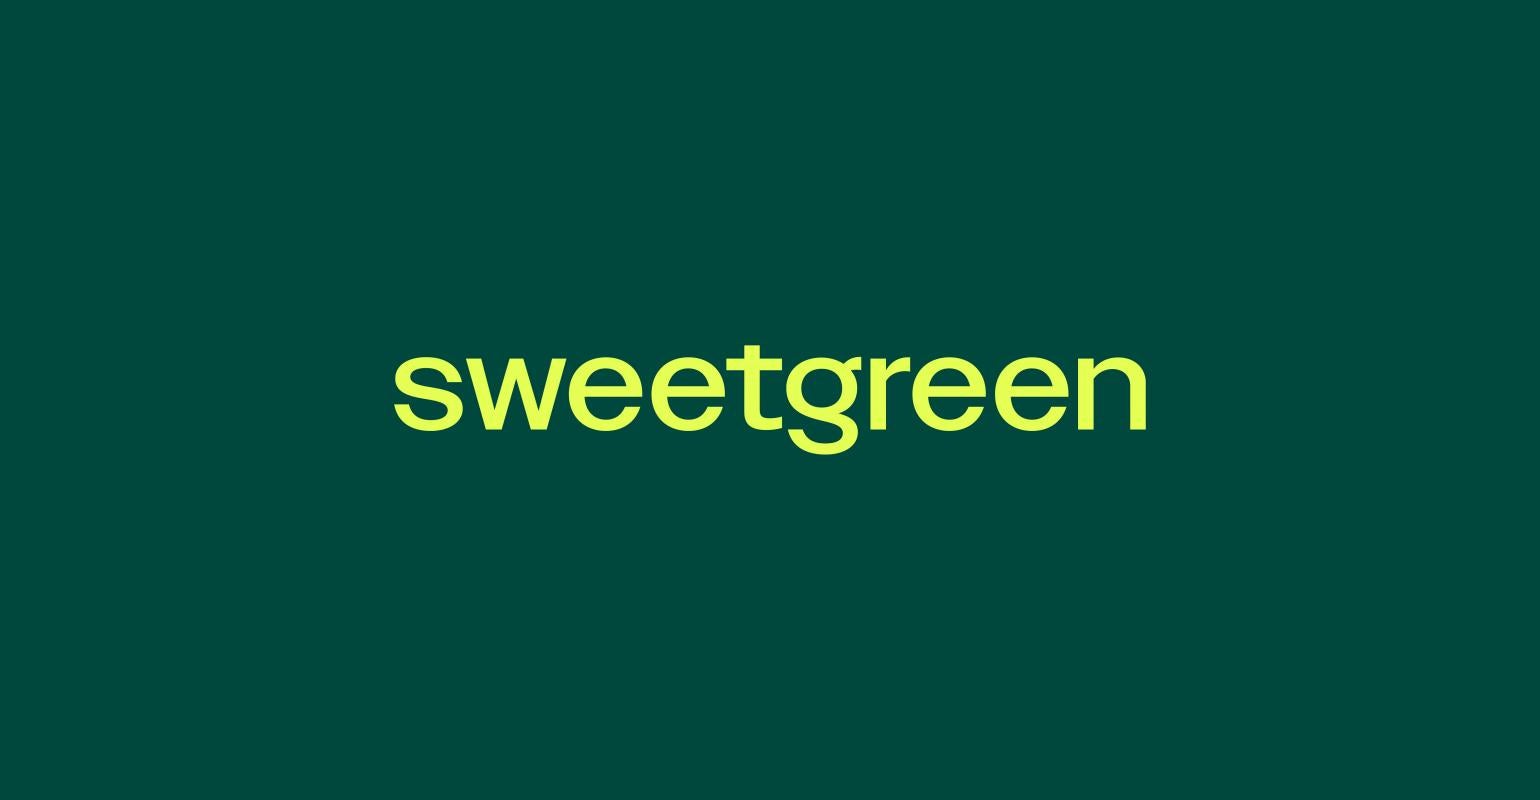 Sweetgreen's logo with yellow text against a green background.